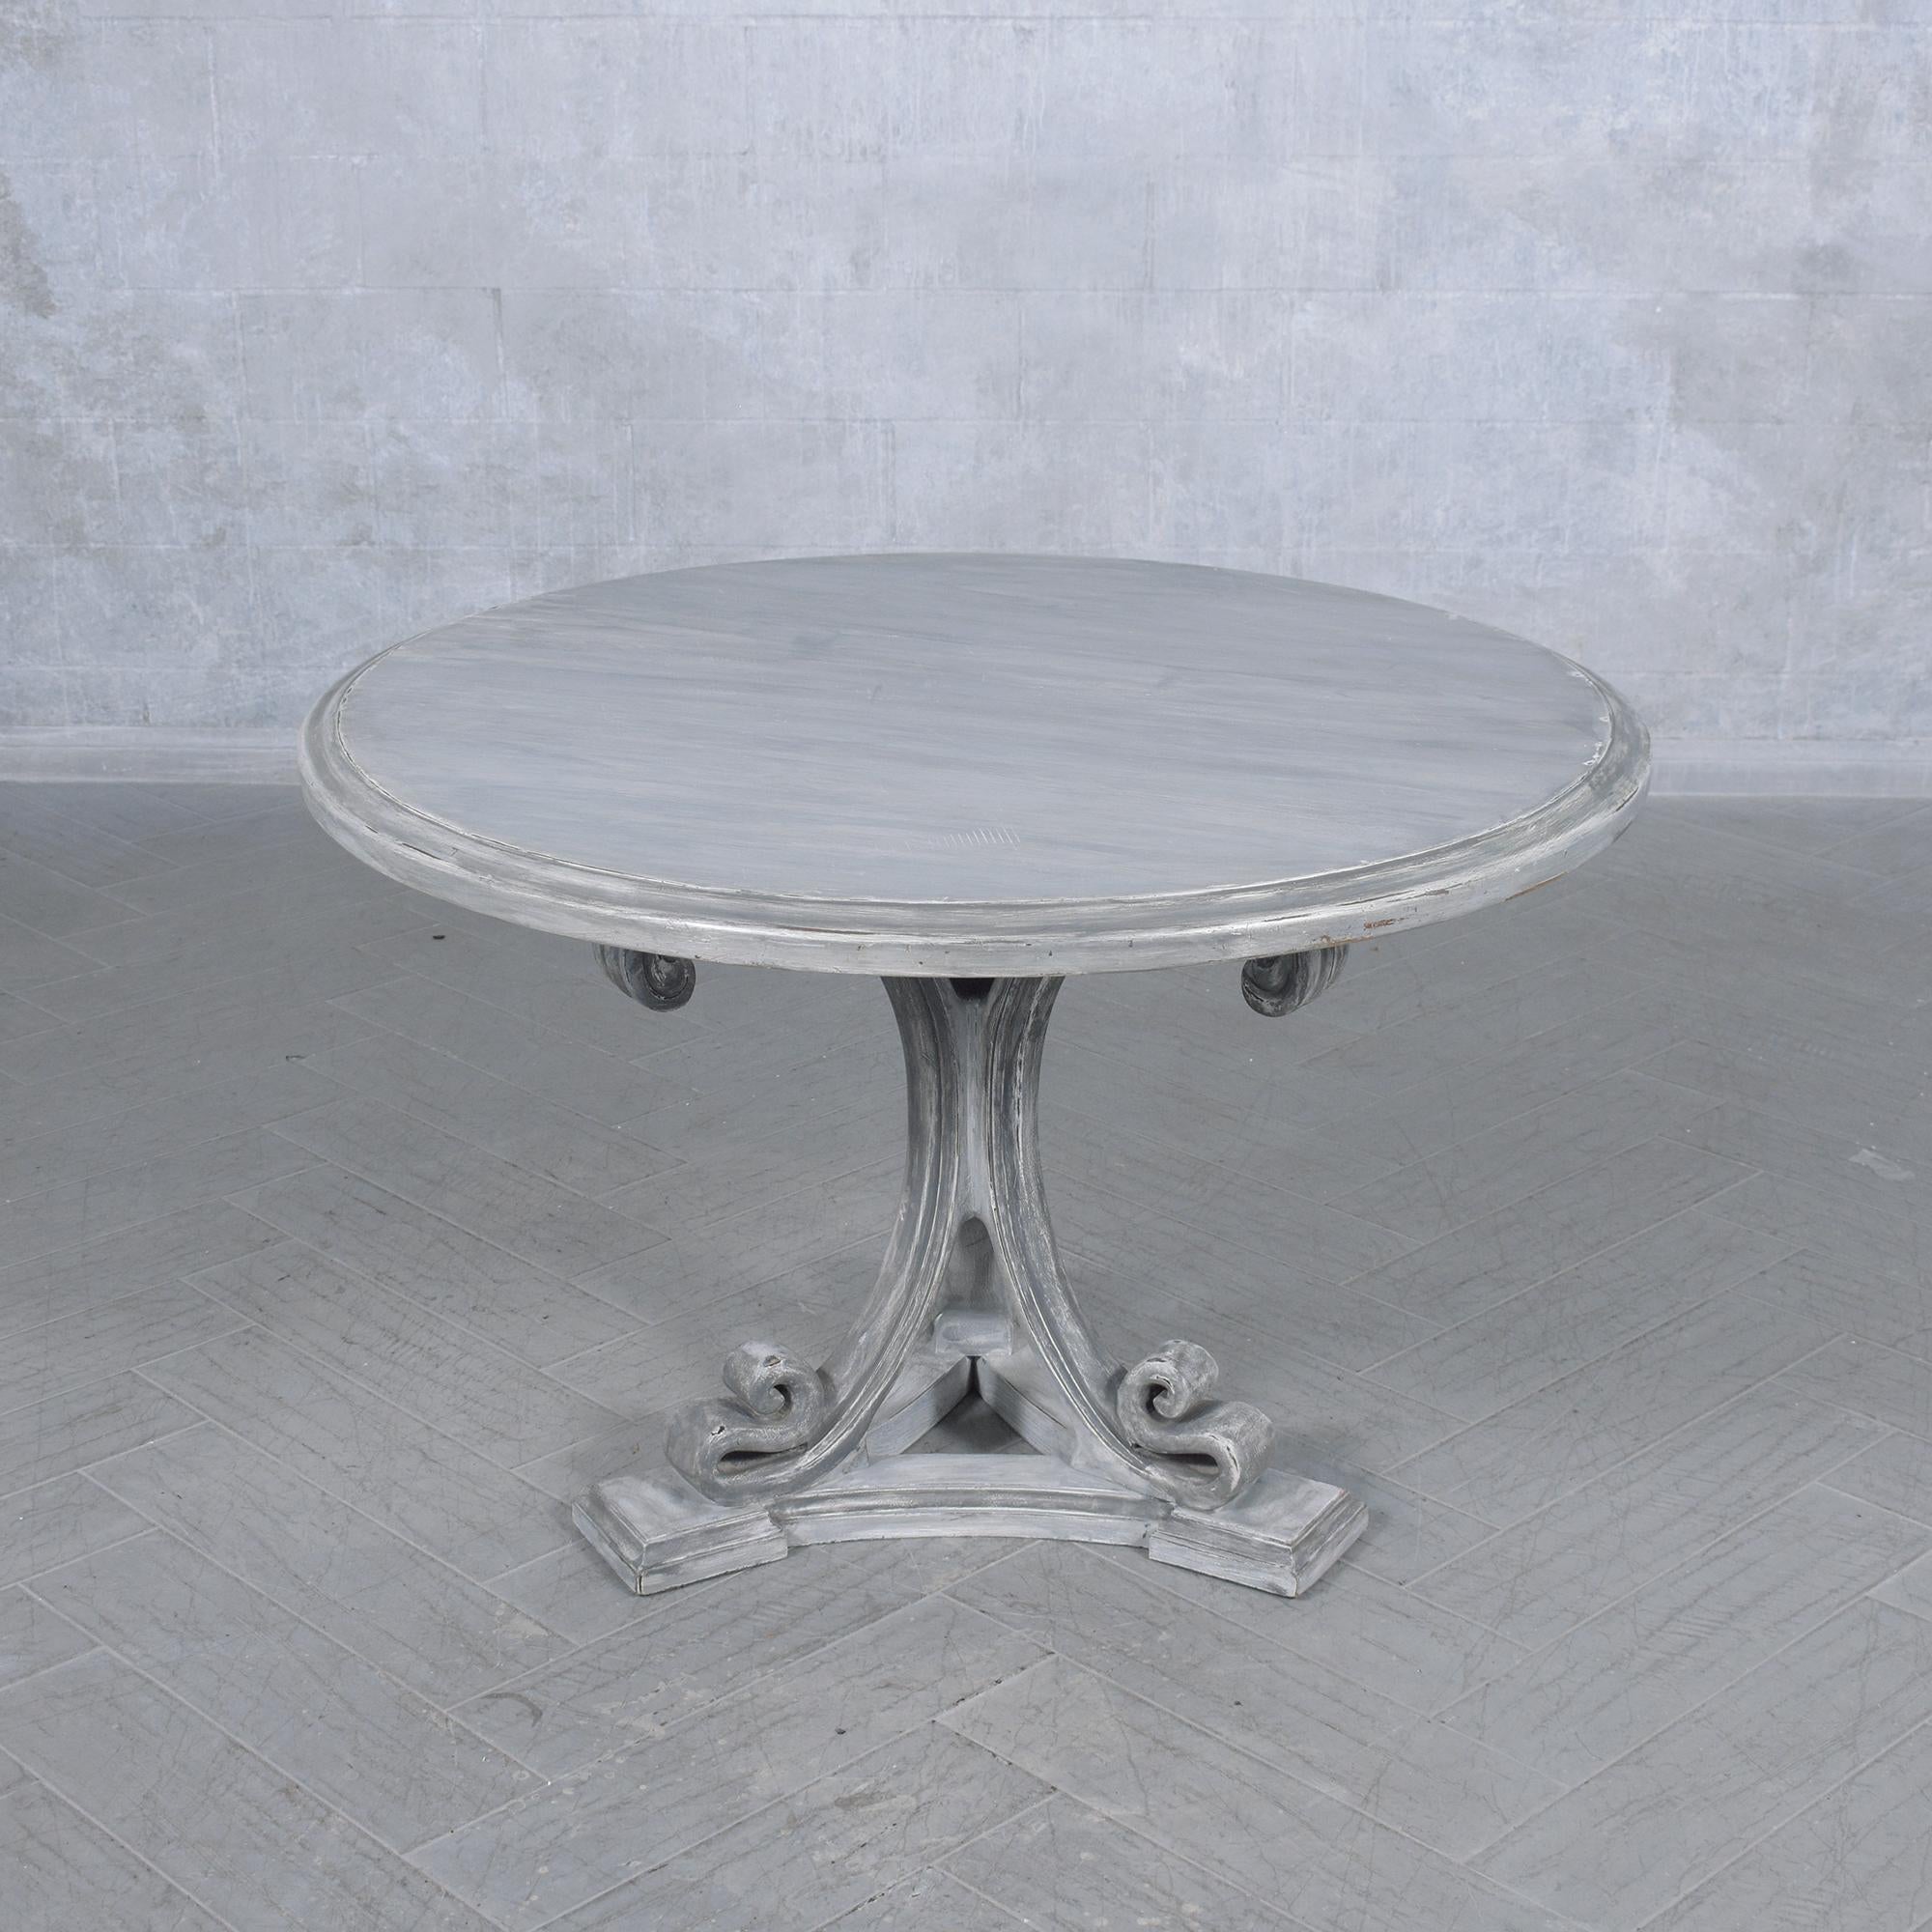 Italian Vintage American Regency Walnut Round Dining Table with Distressed Grey Finish For Sale